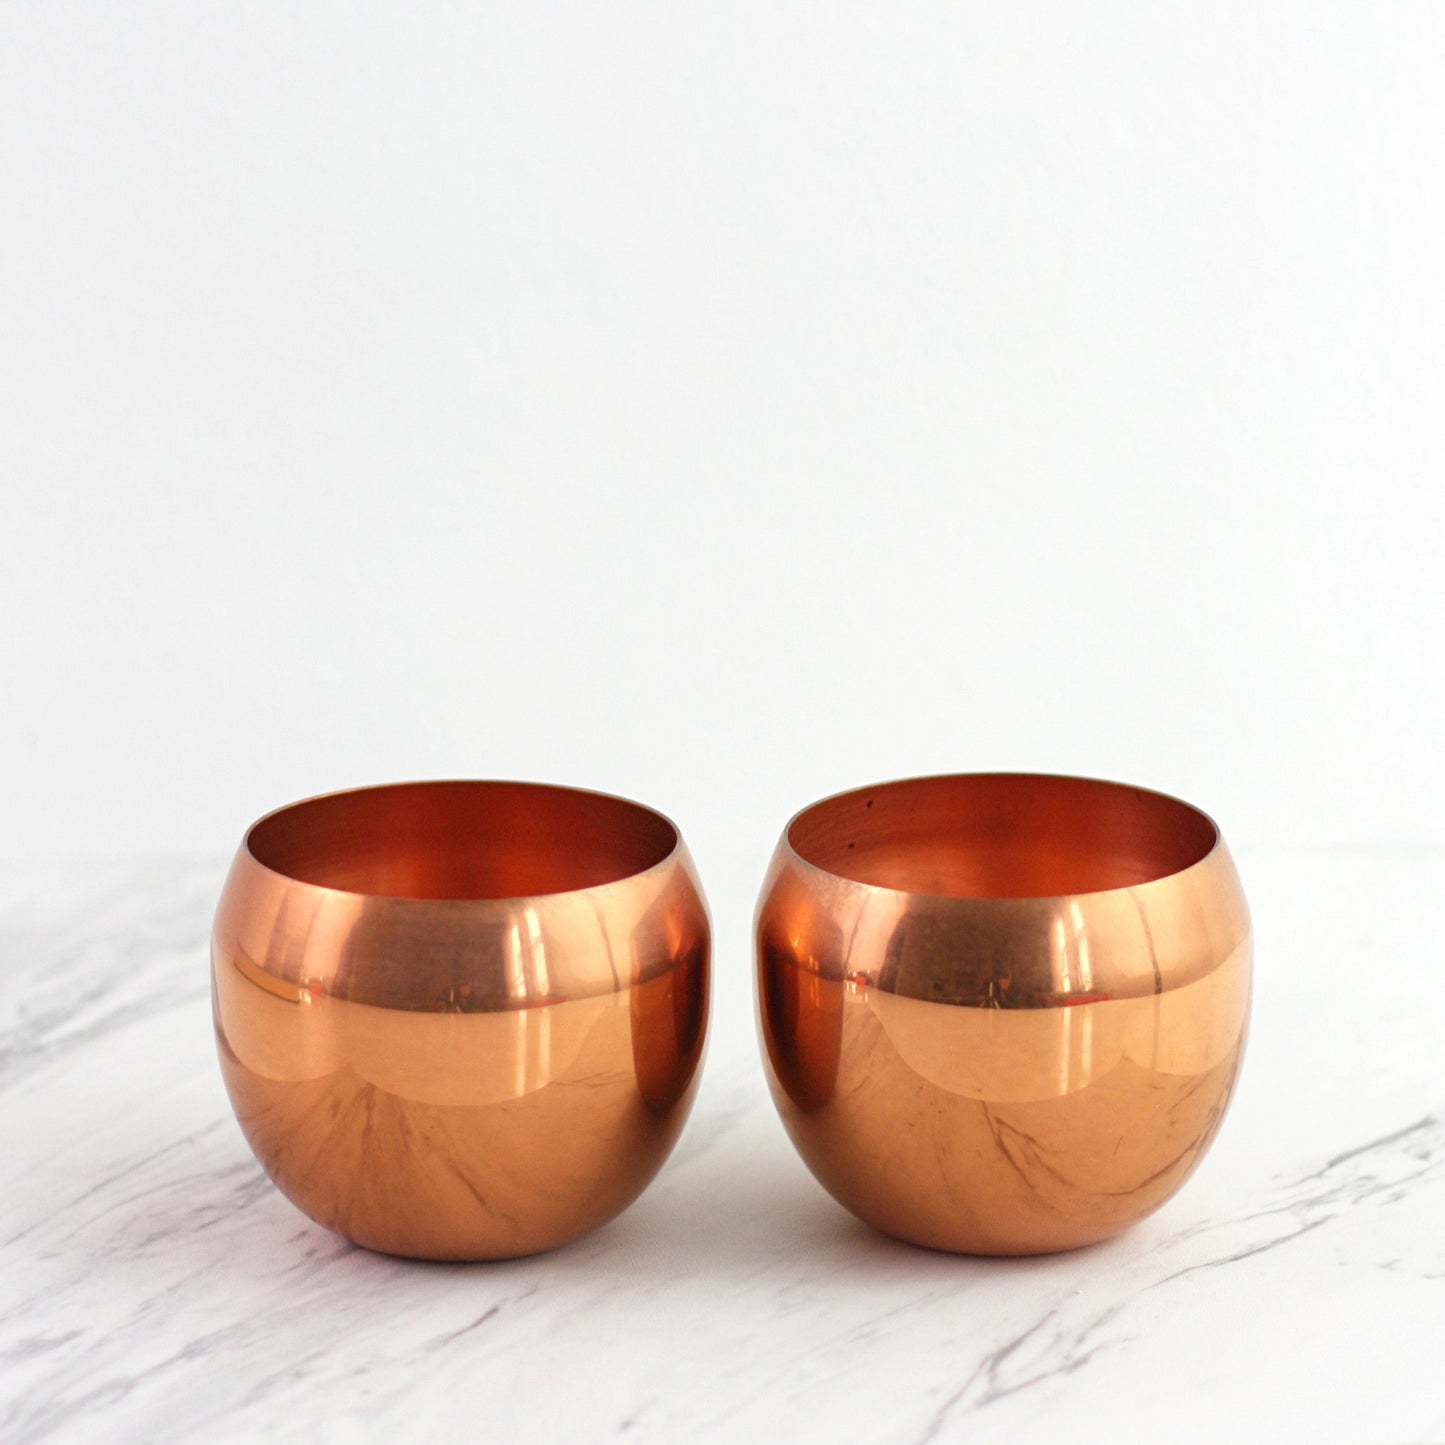 SOLD - Mid Century Modern Copper Planters by Coppercraft Guild